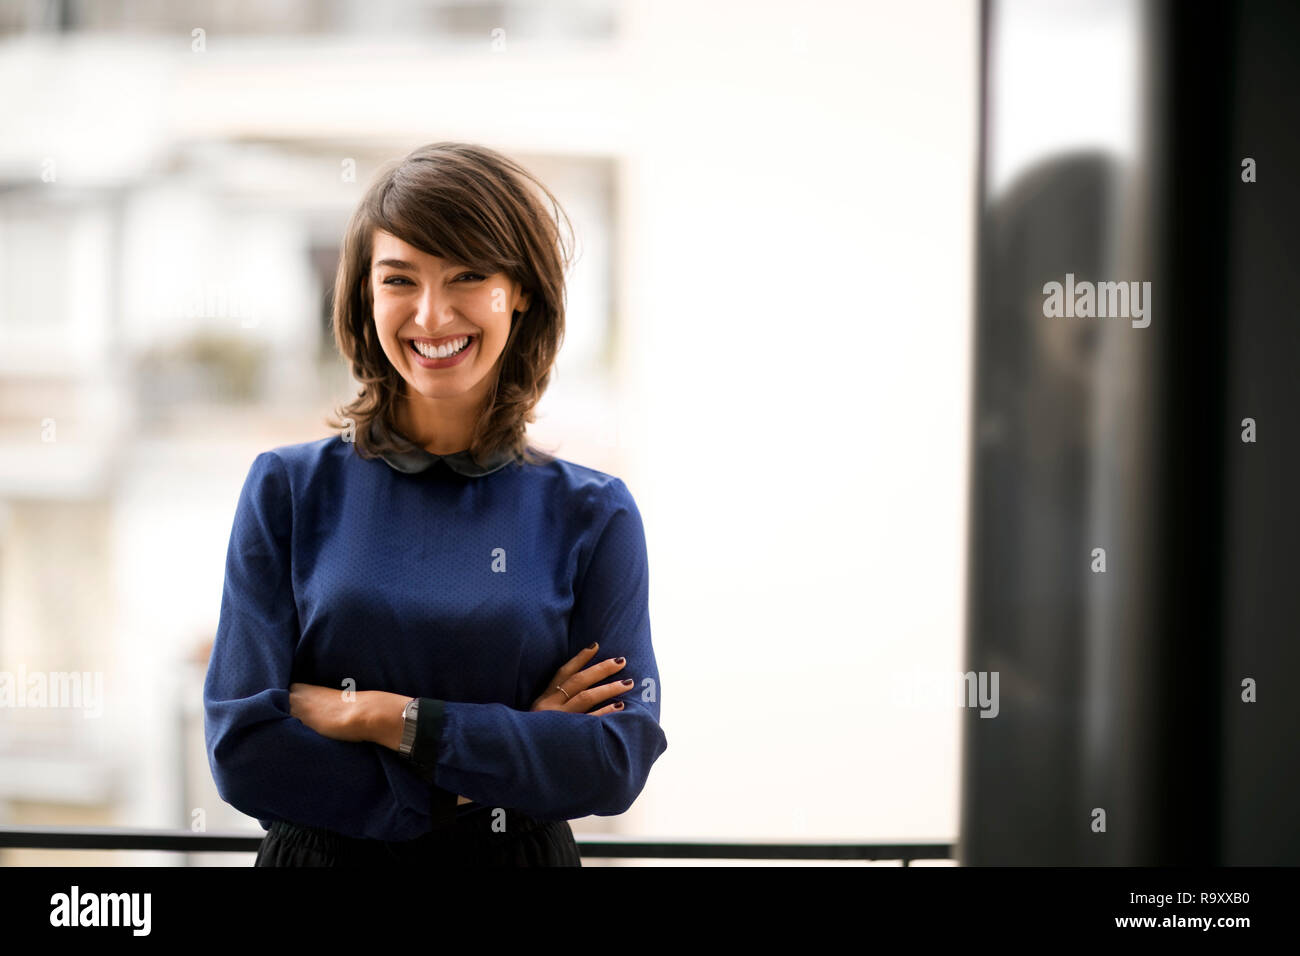 Portrait of a smiling young businesswoman. Stock Photo